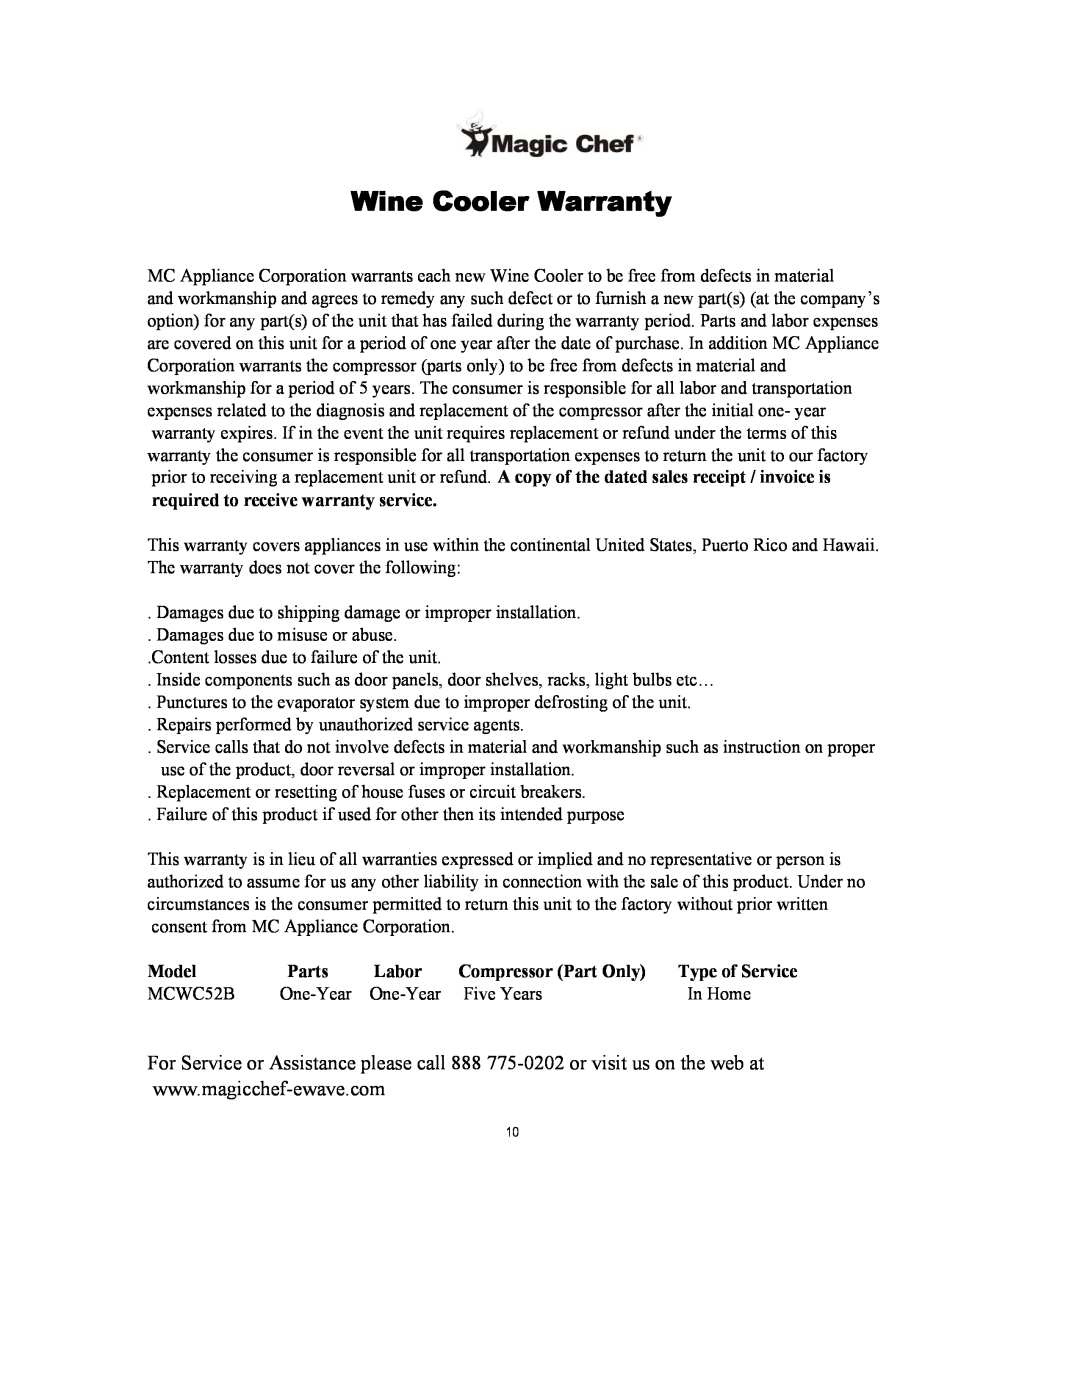 Magic Chef MCWC52B Wine Cooler Warranty, required to receive warranty service, Model, Parts, Labor, Compressor Part Only 